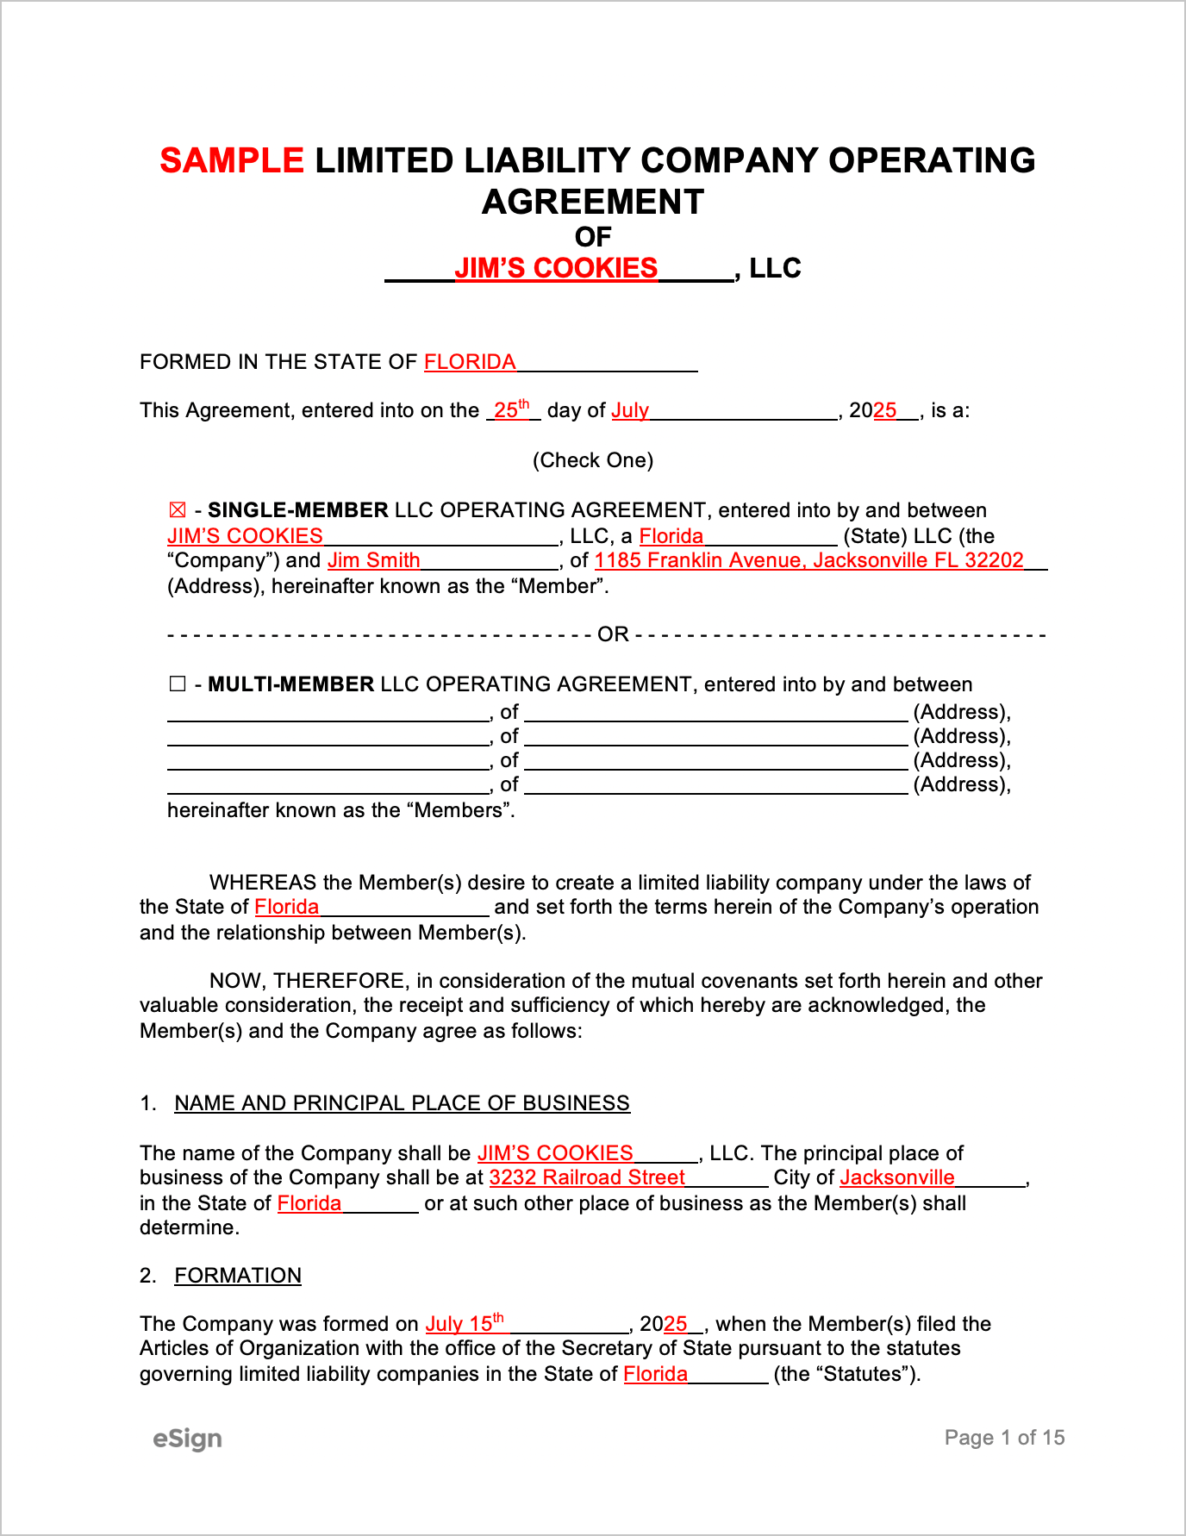 texas-llc-operating-agreement-in-word-and-pdf-formats